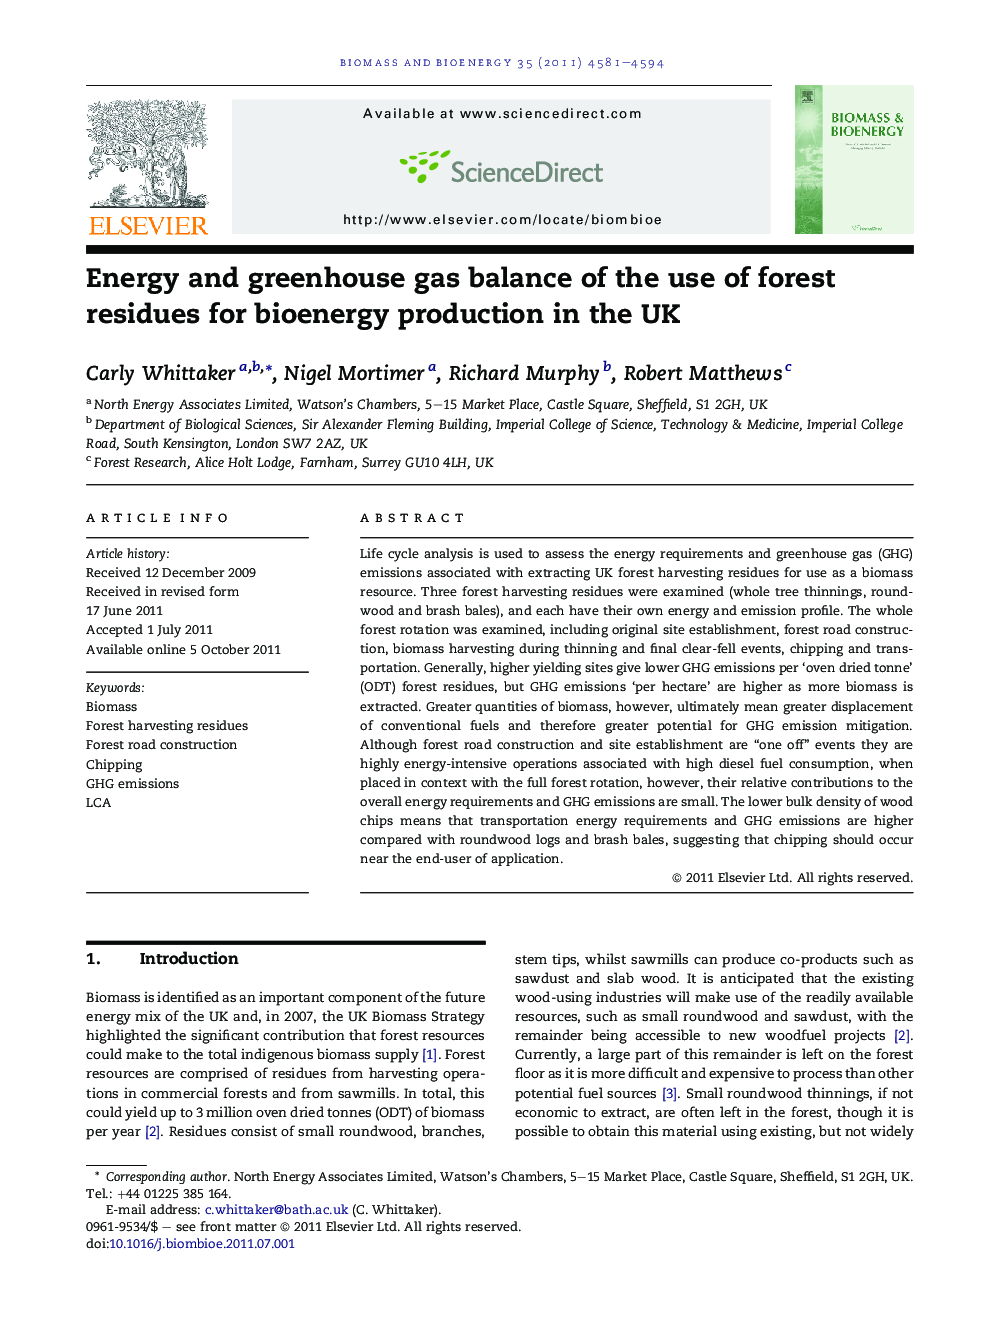 Energy and greenhouse gas balance of the use of forest residues for bioenergy production in the UK